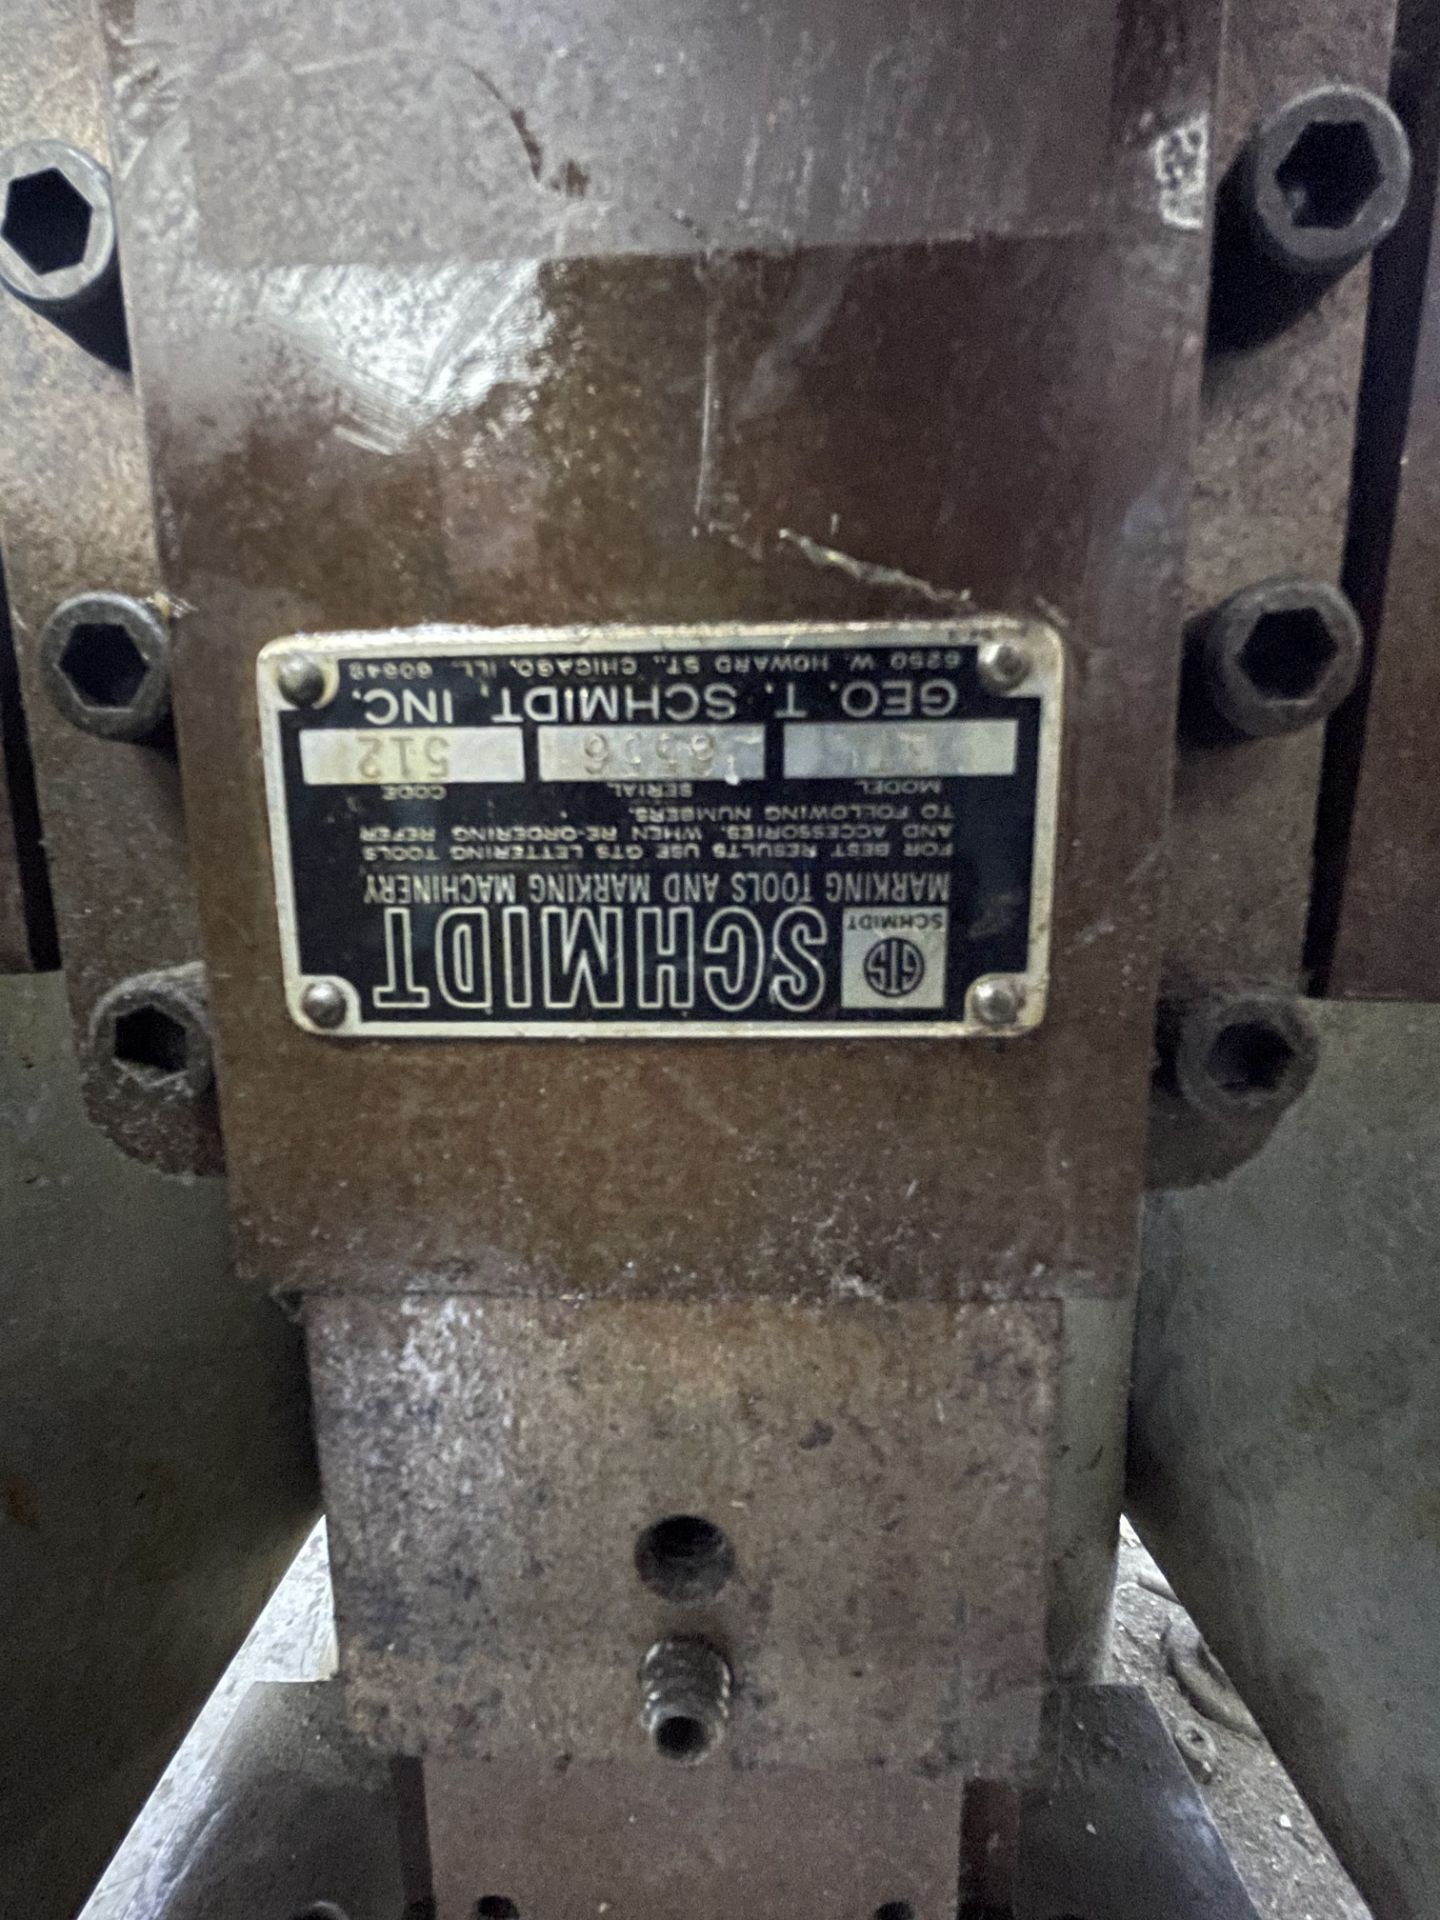 GEO. T. Schmidt Marking tool, Model Number 3T electric/pnuematic; working condition unknown - Image 7 of 12